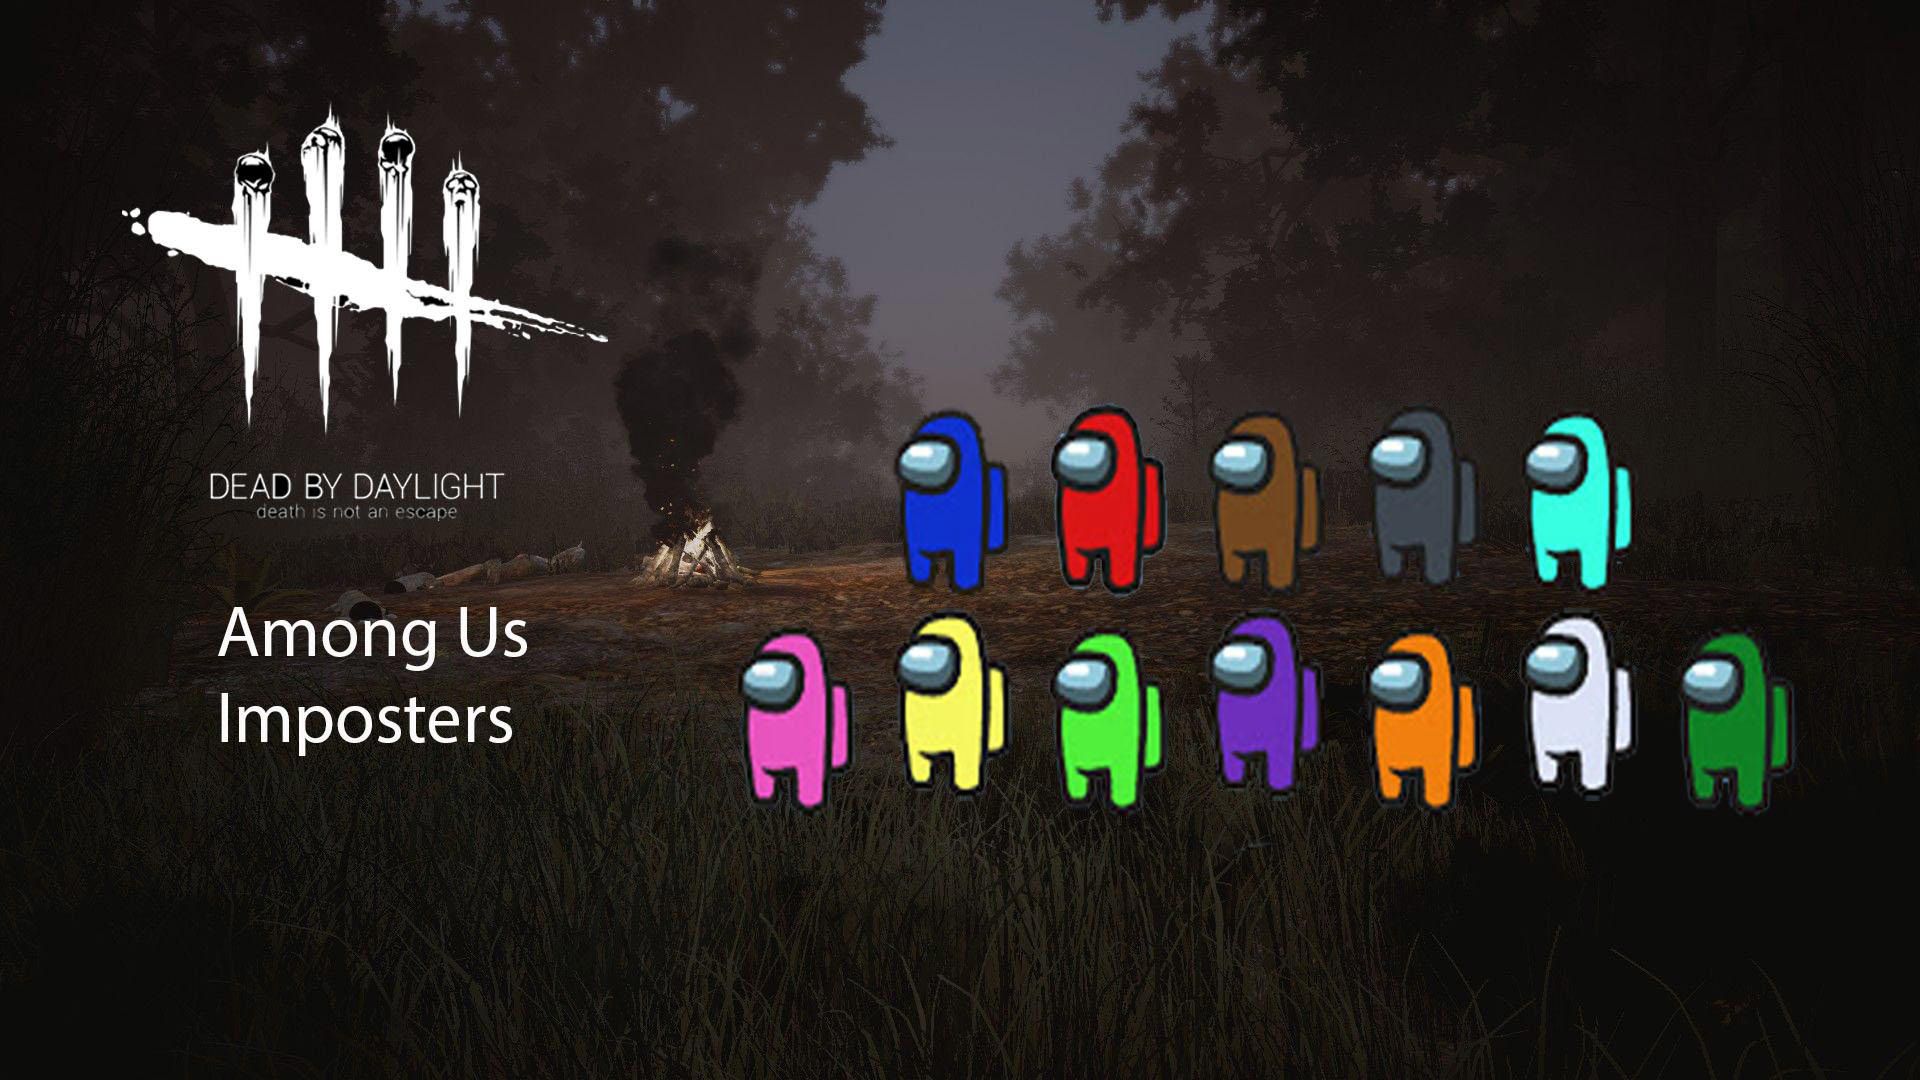 Among Us Imposters x Dead By Daylight 1400x900 Resolution Wallpaper, HD Games 4K Wallpaper, Image, Photo and Background